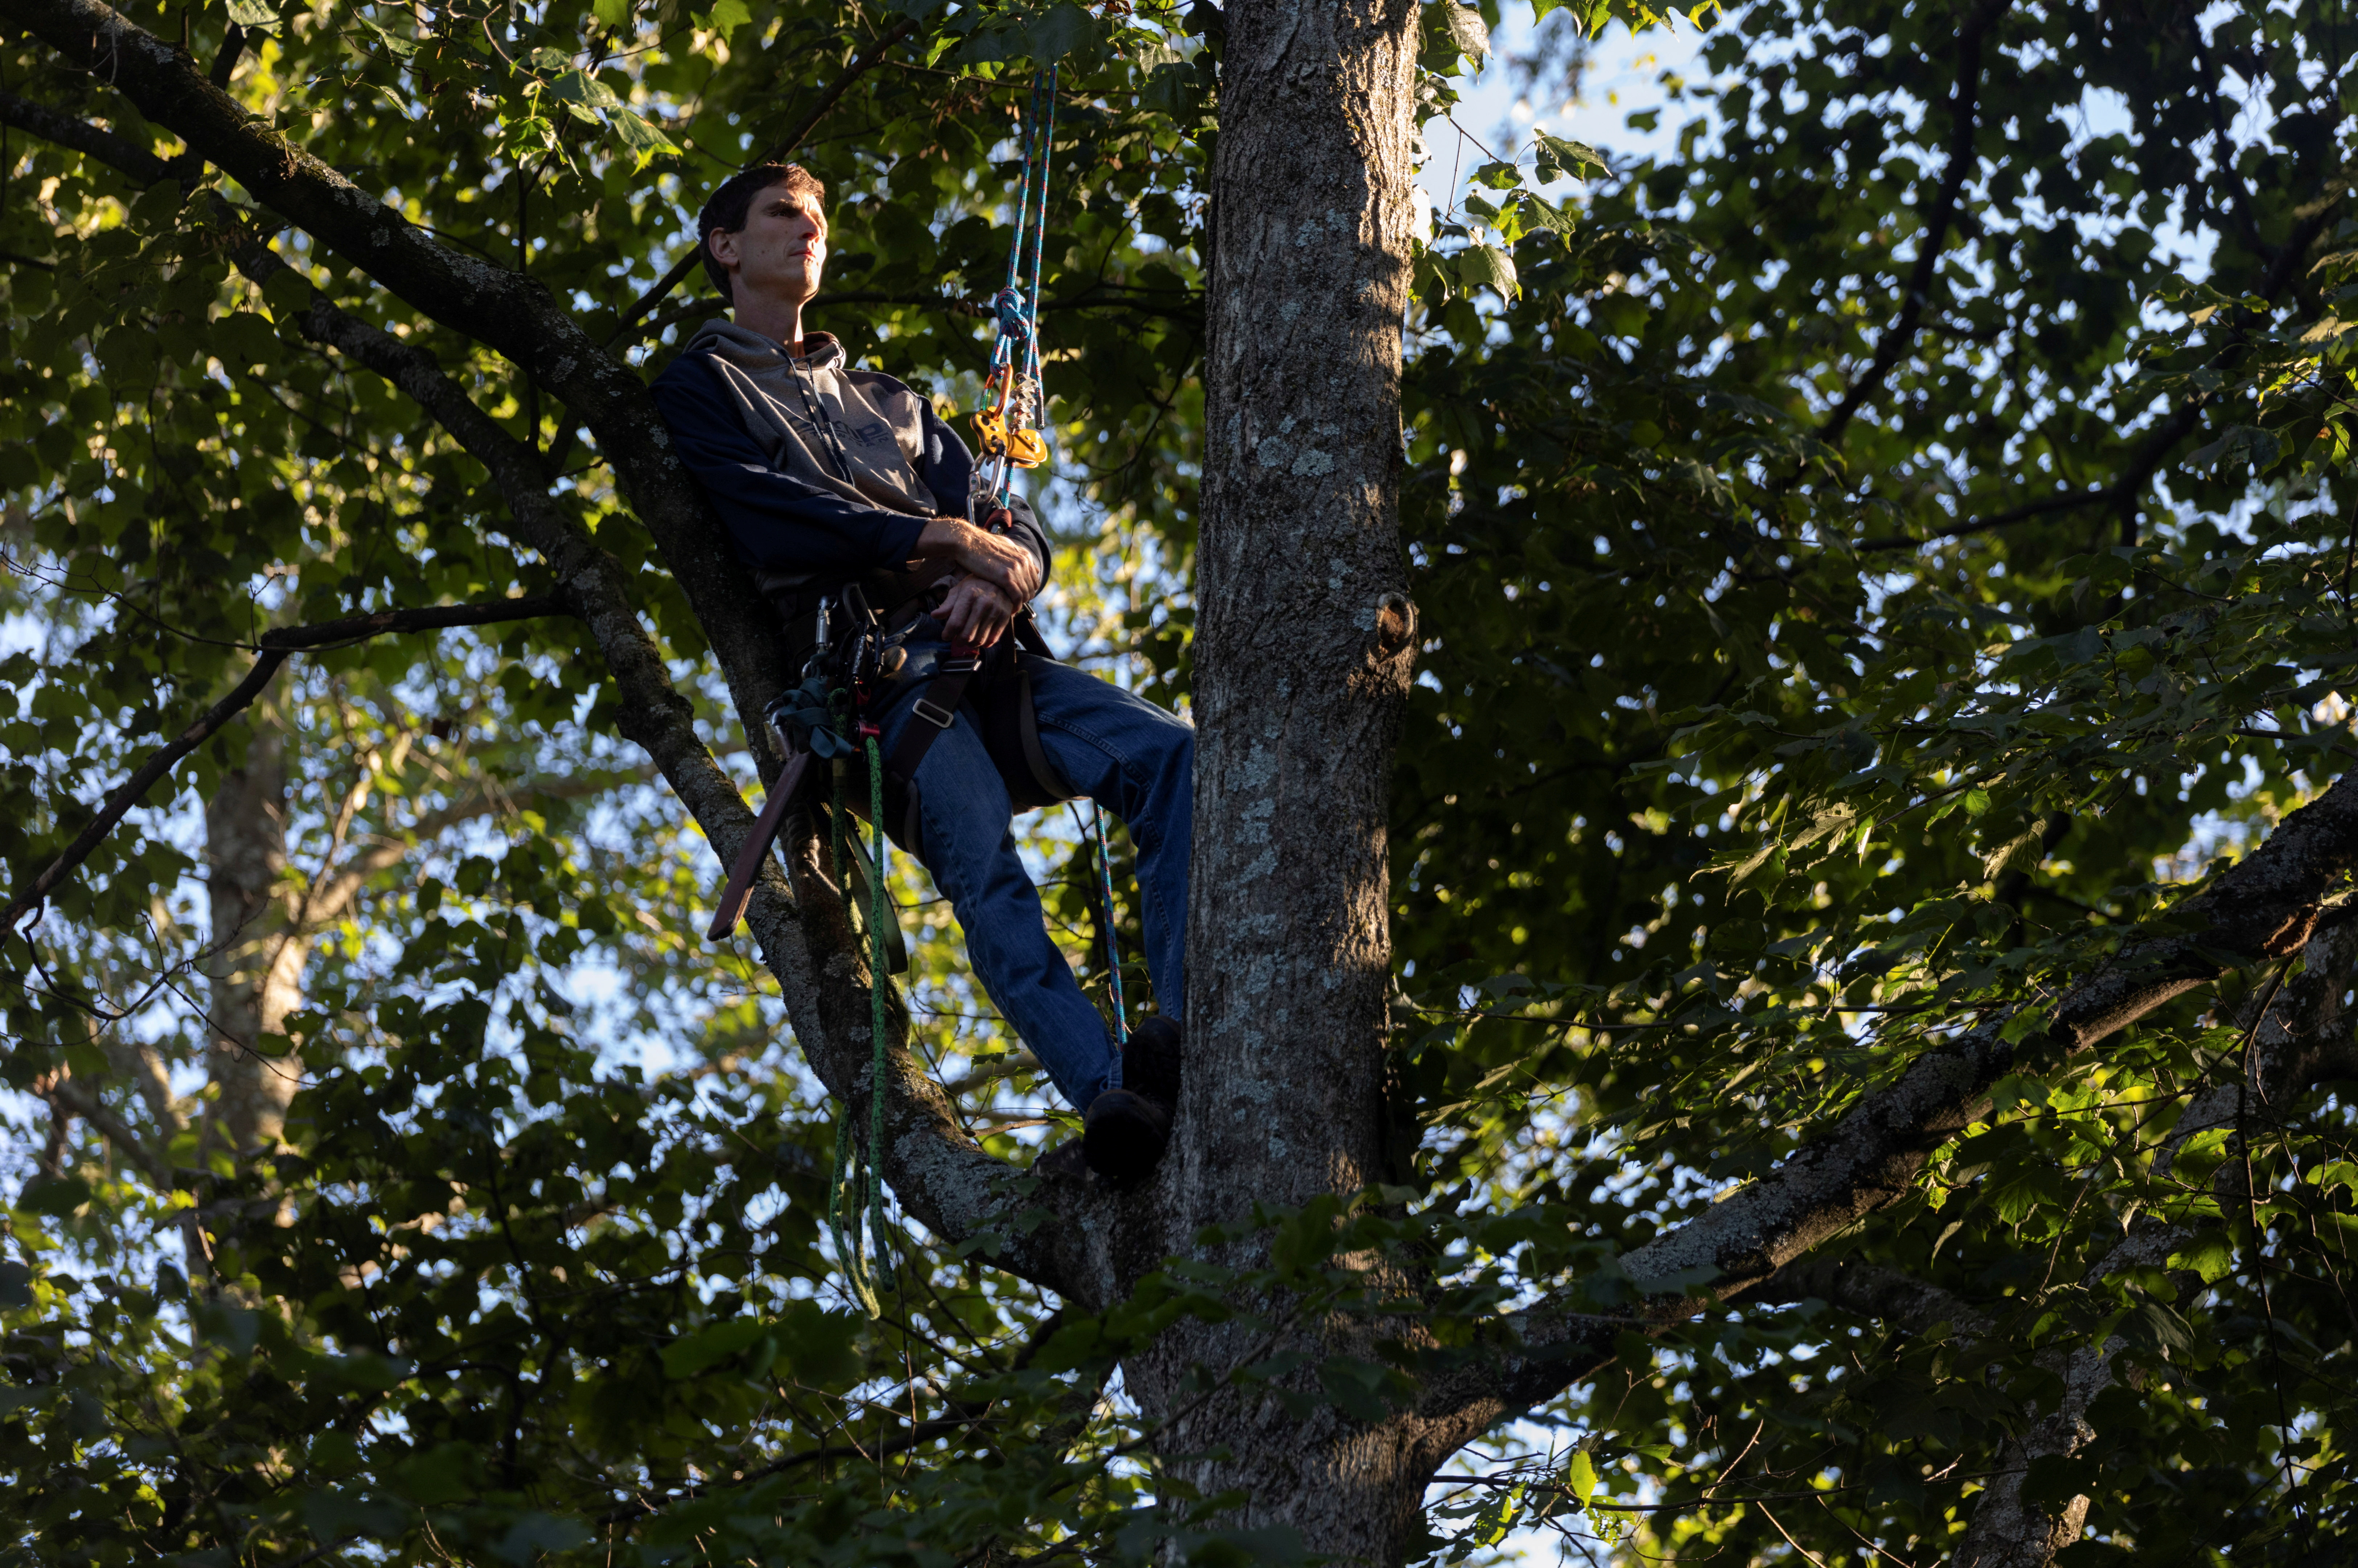 Arborist Ben Haupt poses for a portrait in his tree climbing gear at his home in Spring Mills, Pennsylvania. REUTERS/Hannah Beier  